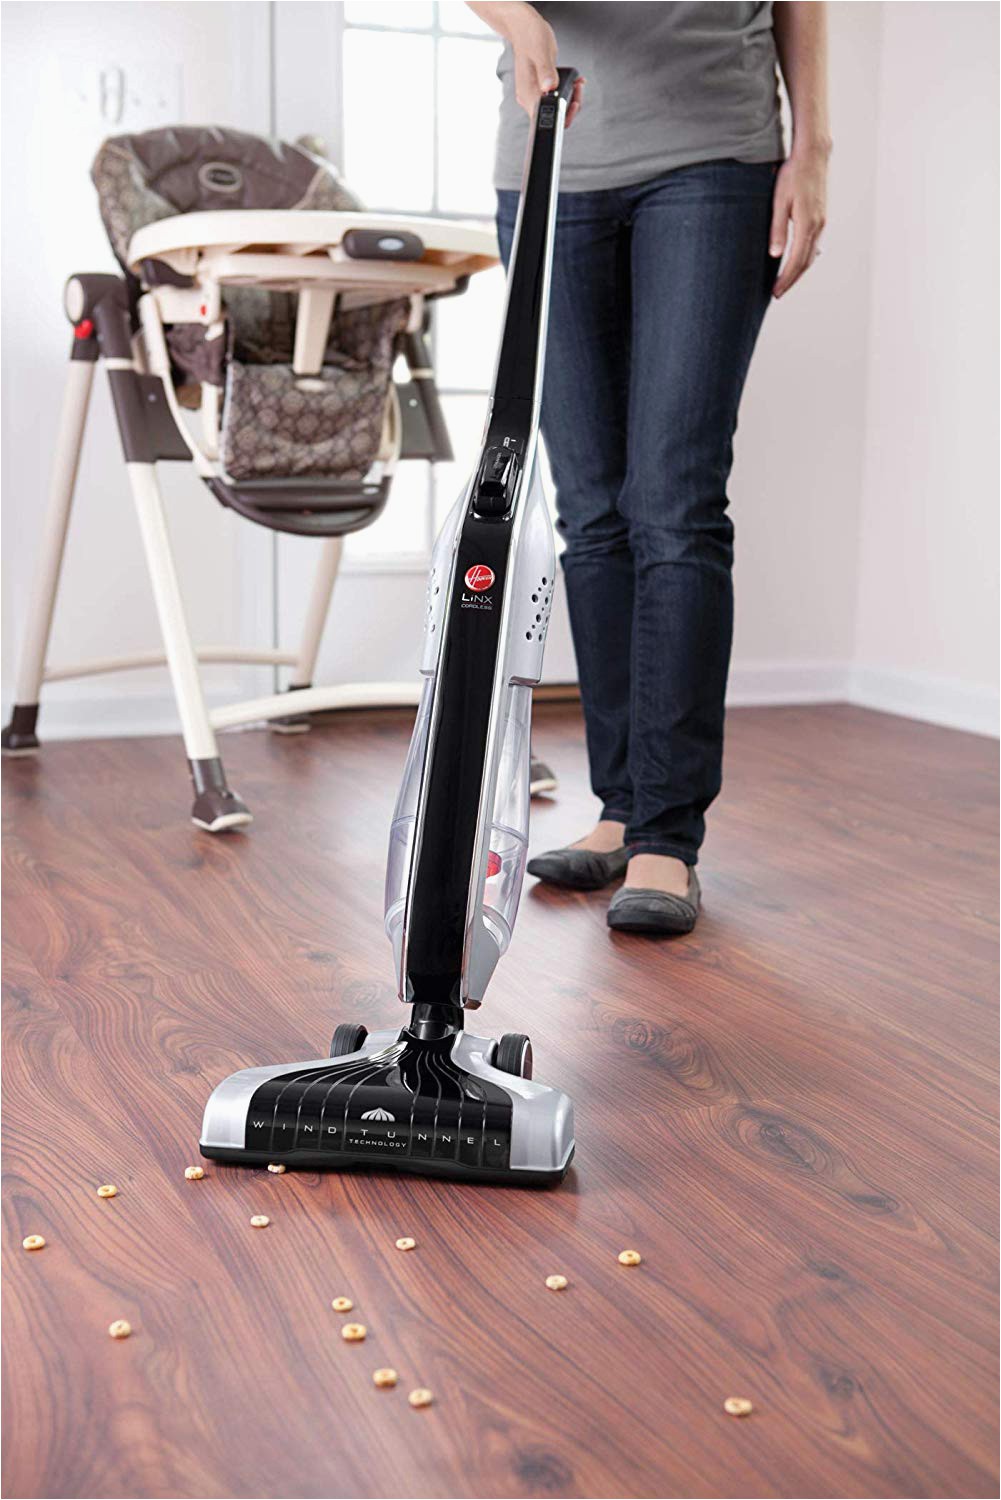 Best Vacuum for Bare Floors and area Rugs 10 Best Vacuum for Hardwood Floors Reviews In 2020 Buying